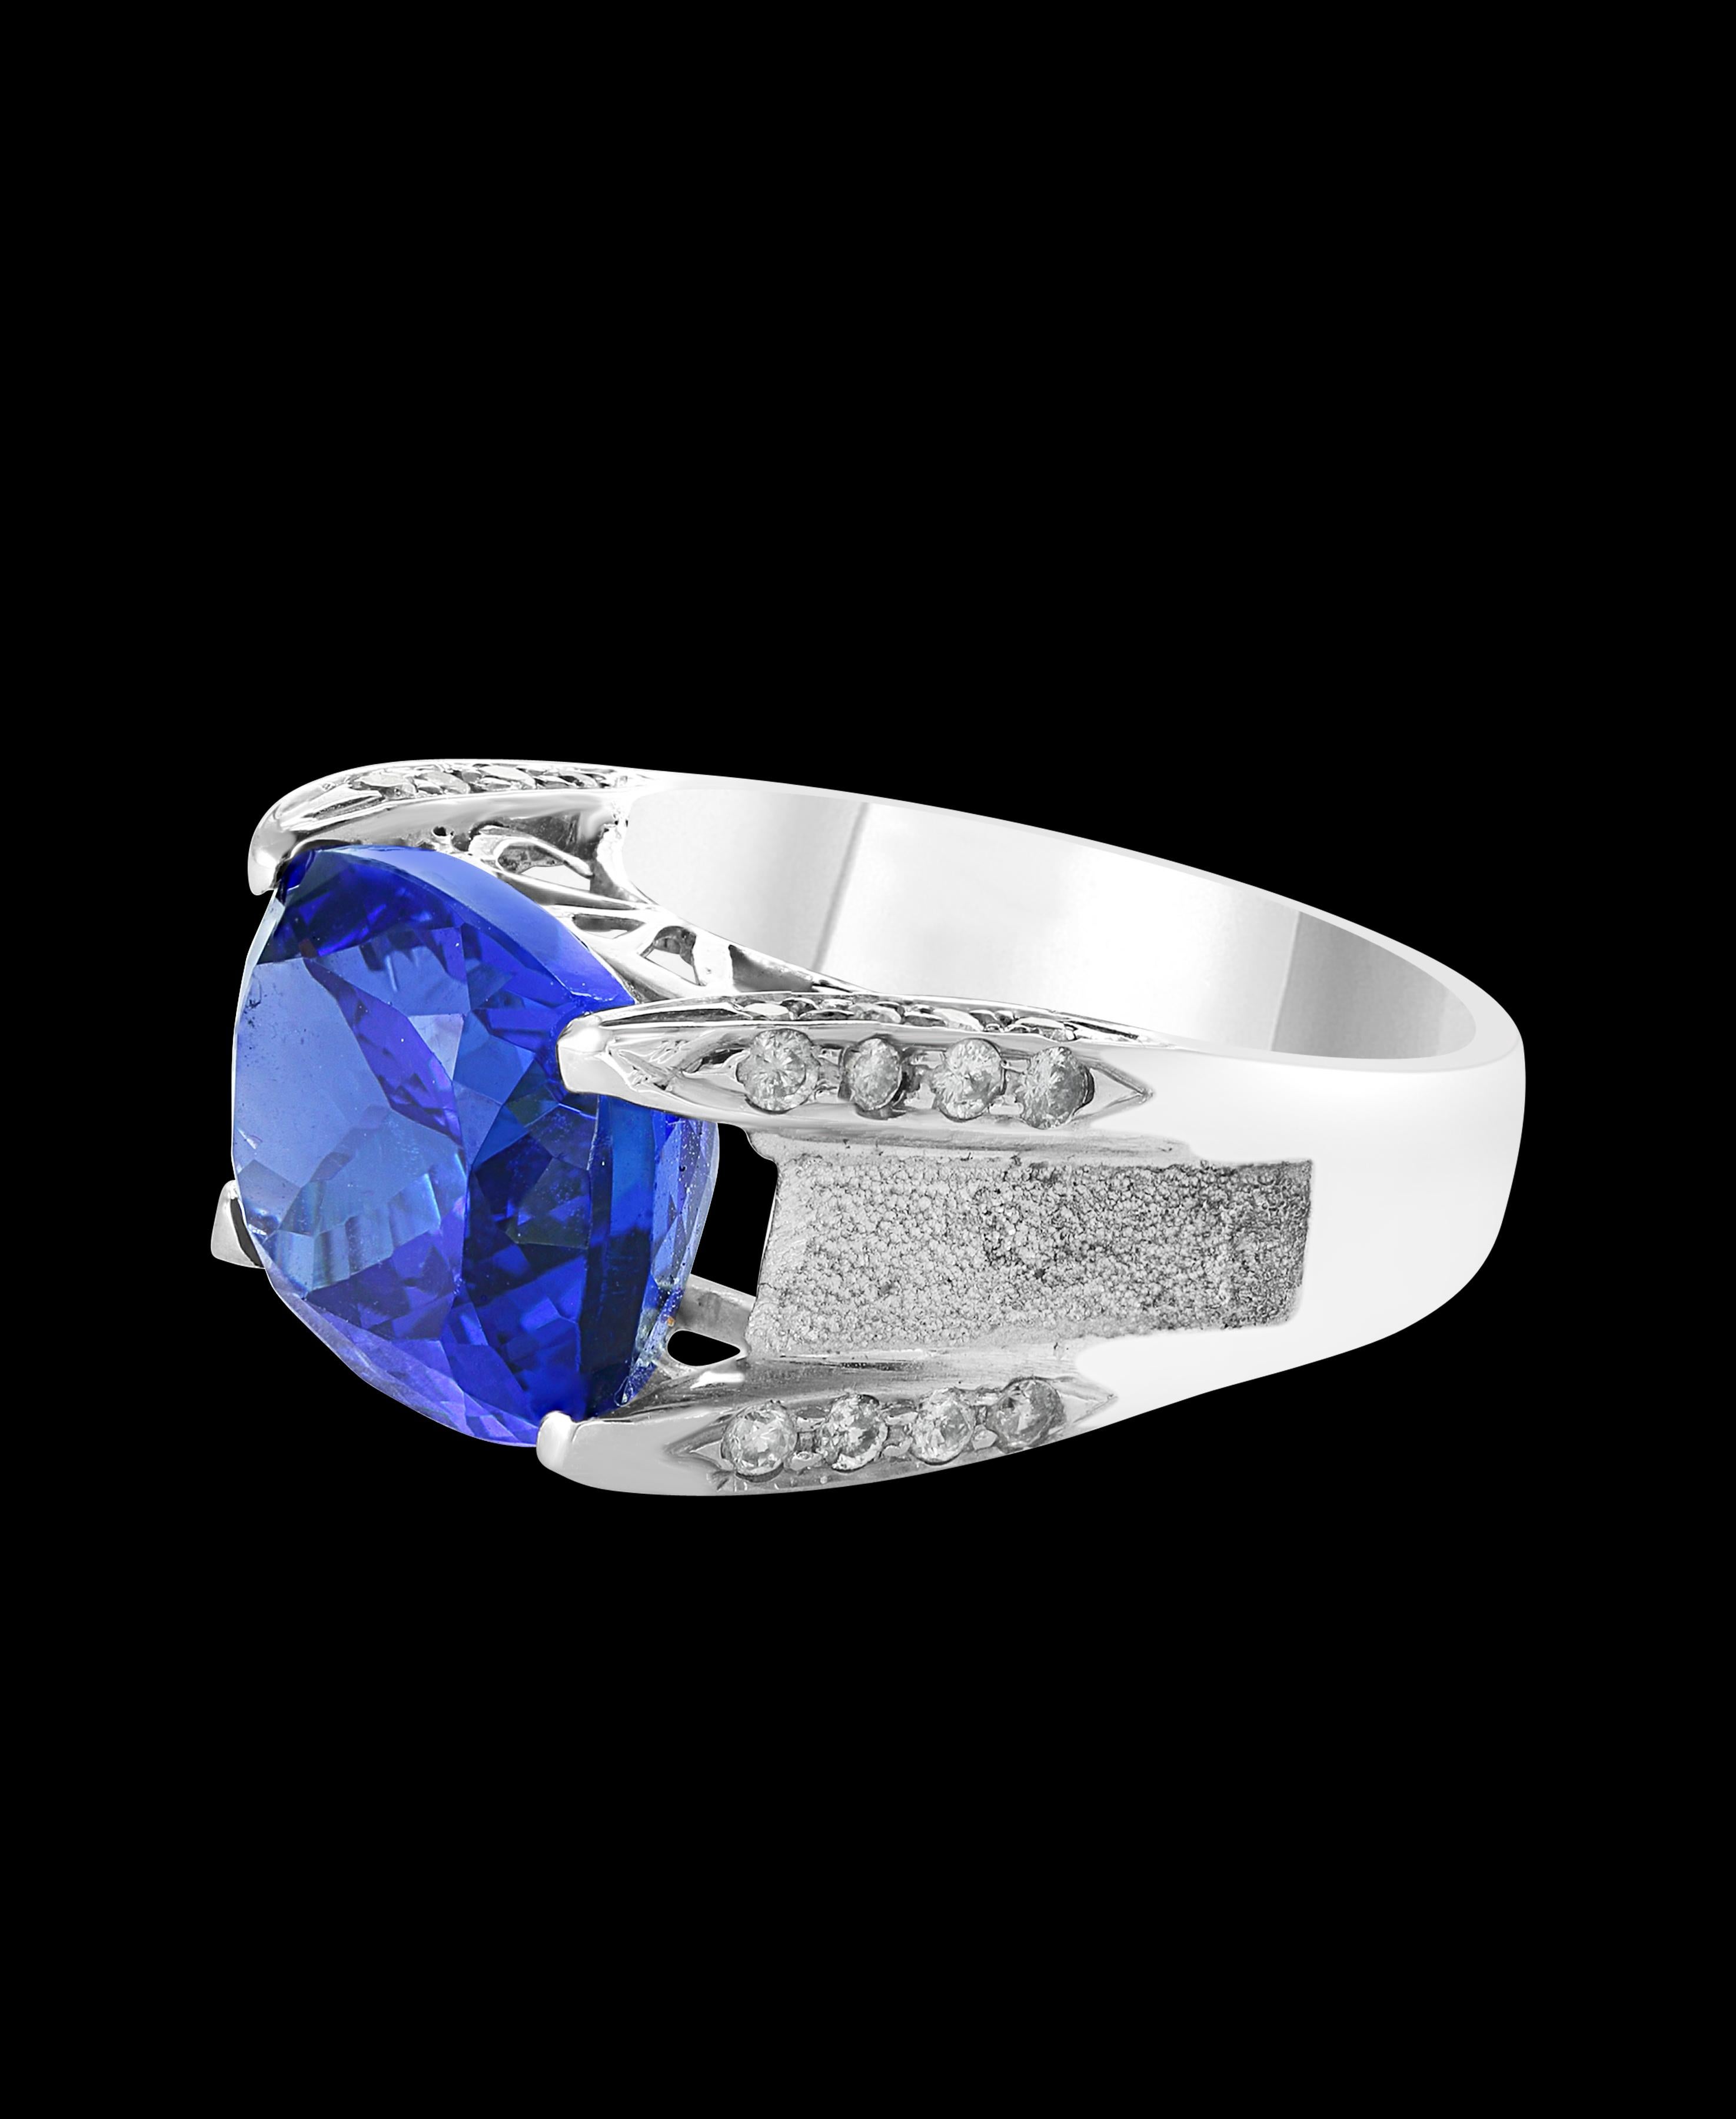 This extraordinary, 9.3 carat tanzanite is truly an extraordinary gemstone. There are  total  of 0.65 carats of shimmering white diamonds, this brilliant cushion-cut gem exhibits the rich violetish-blue color for which these stones are known and so